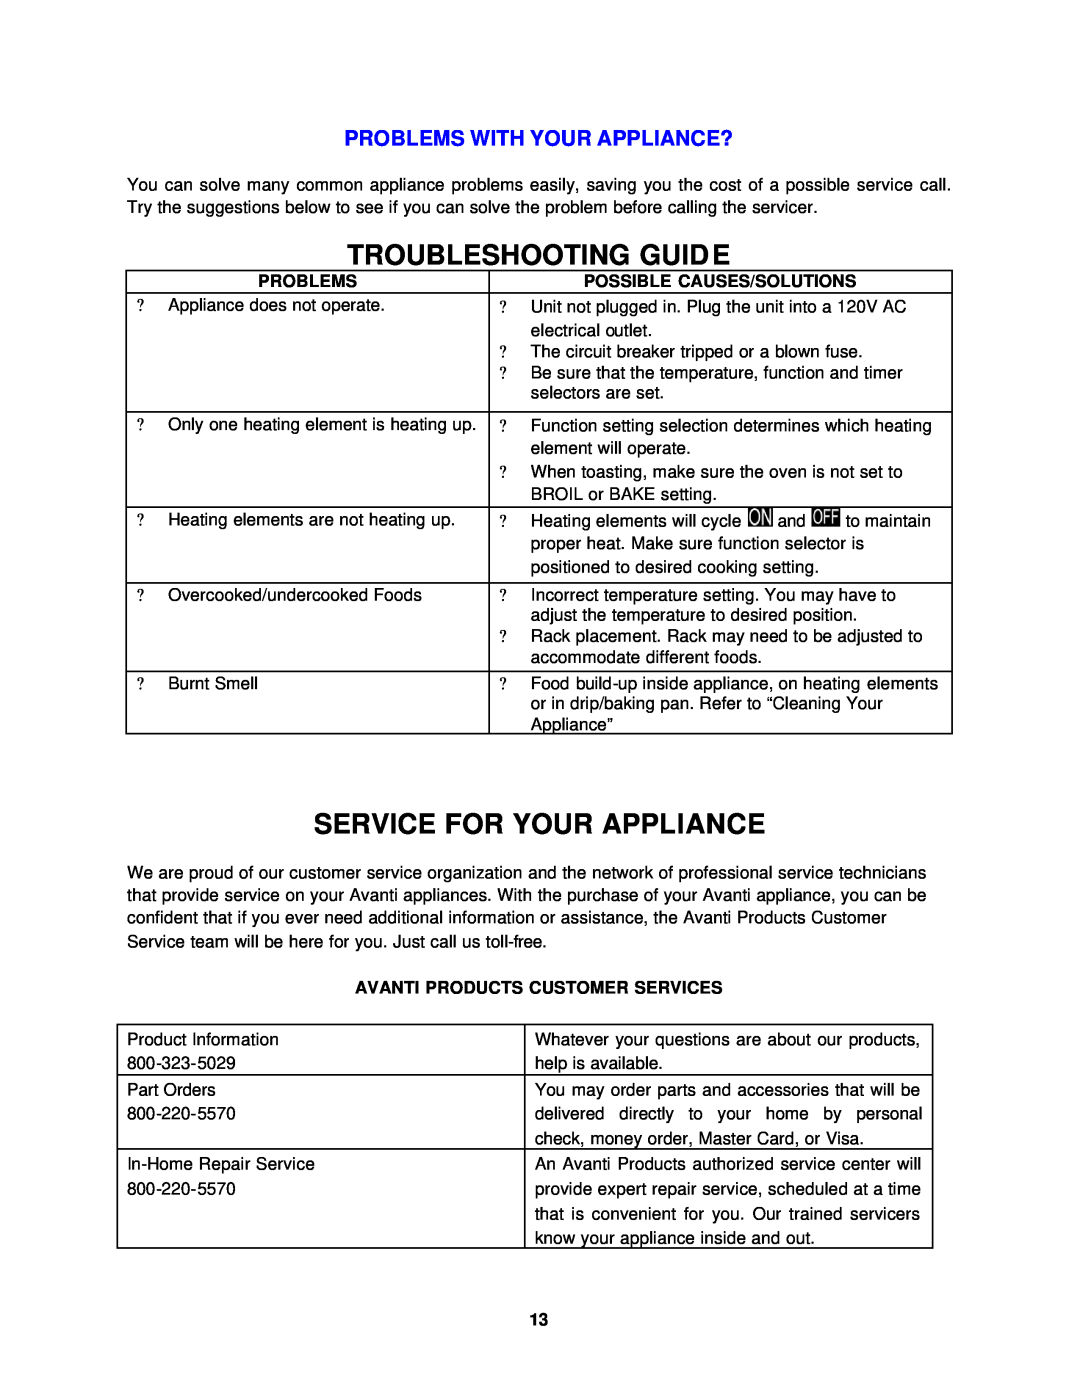 Avanti T-18 Troubleshooting Guide, Service For Your Appliance, Problems With Your Appliance?, Possible Causes/Solutions 